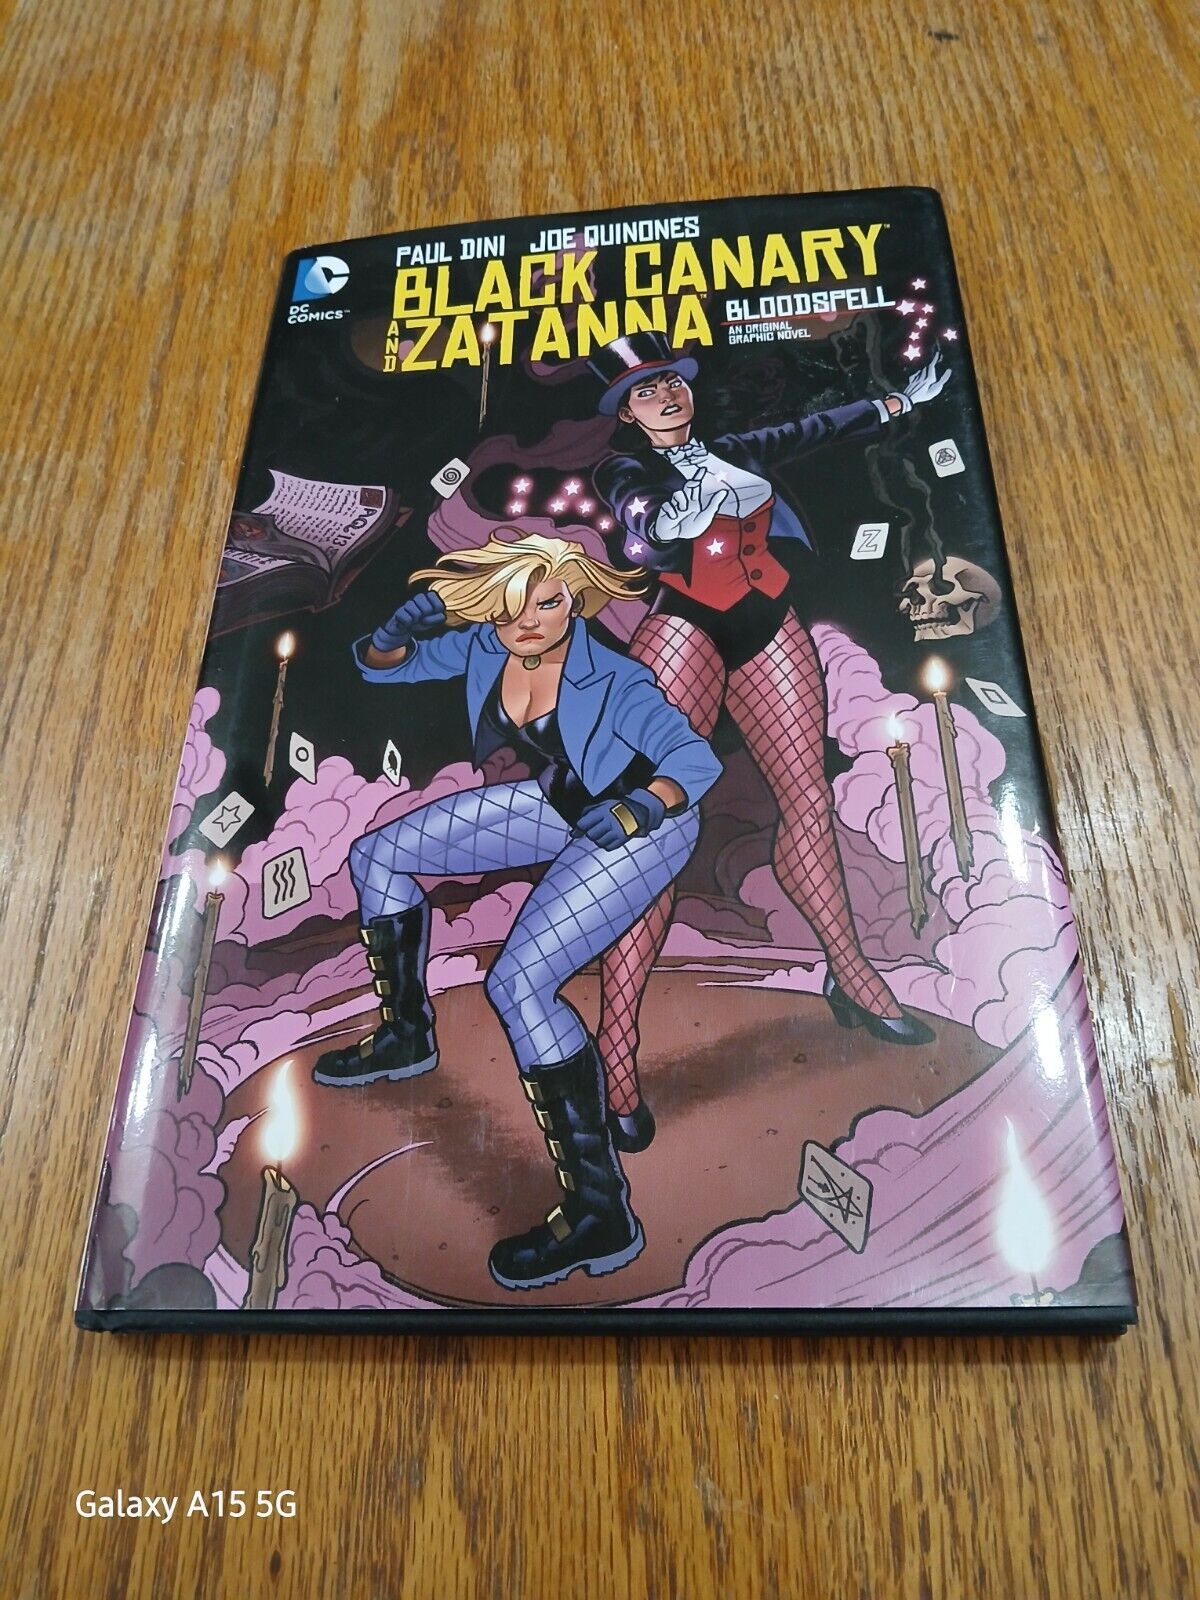 Black Canary Volume #1 Hardcover 1st print GN. (DC 2014) VF- condition. C5